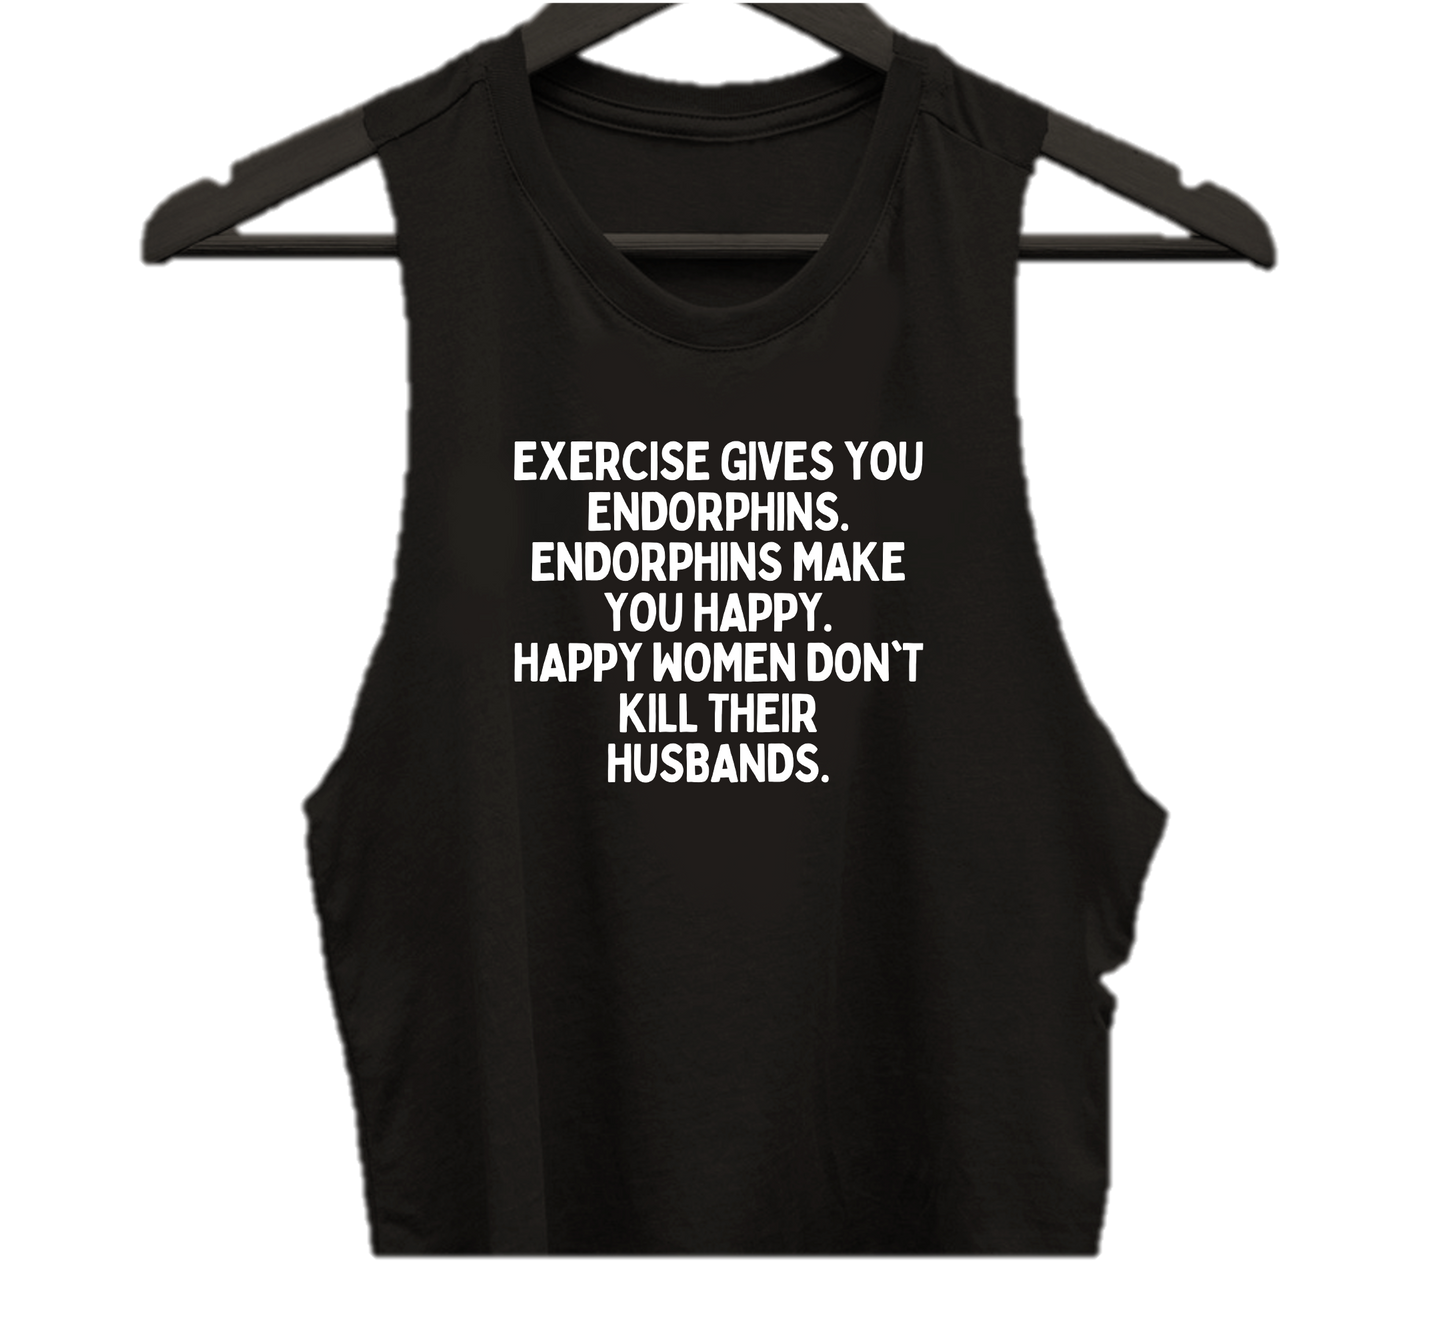 EXERCISE GIVES YOU ENDORPHINS.